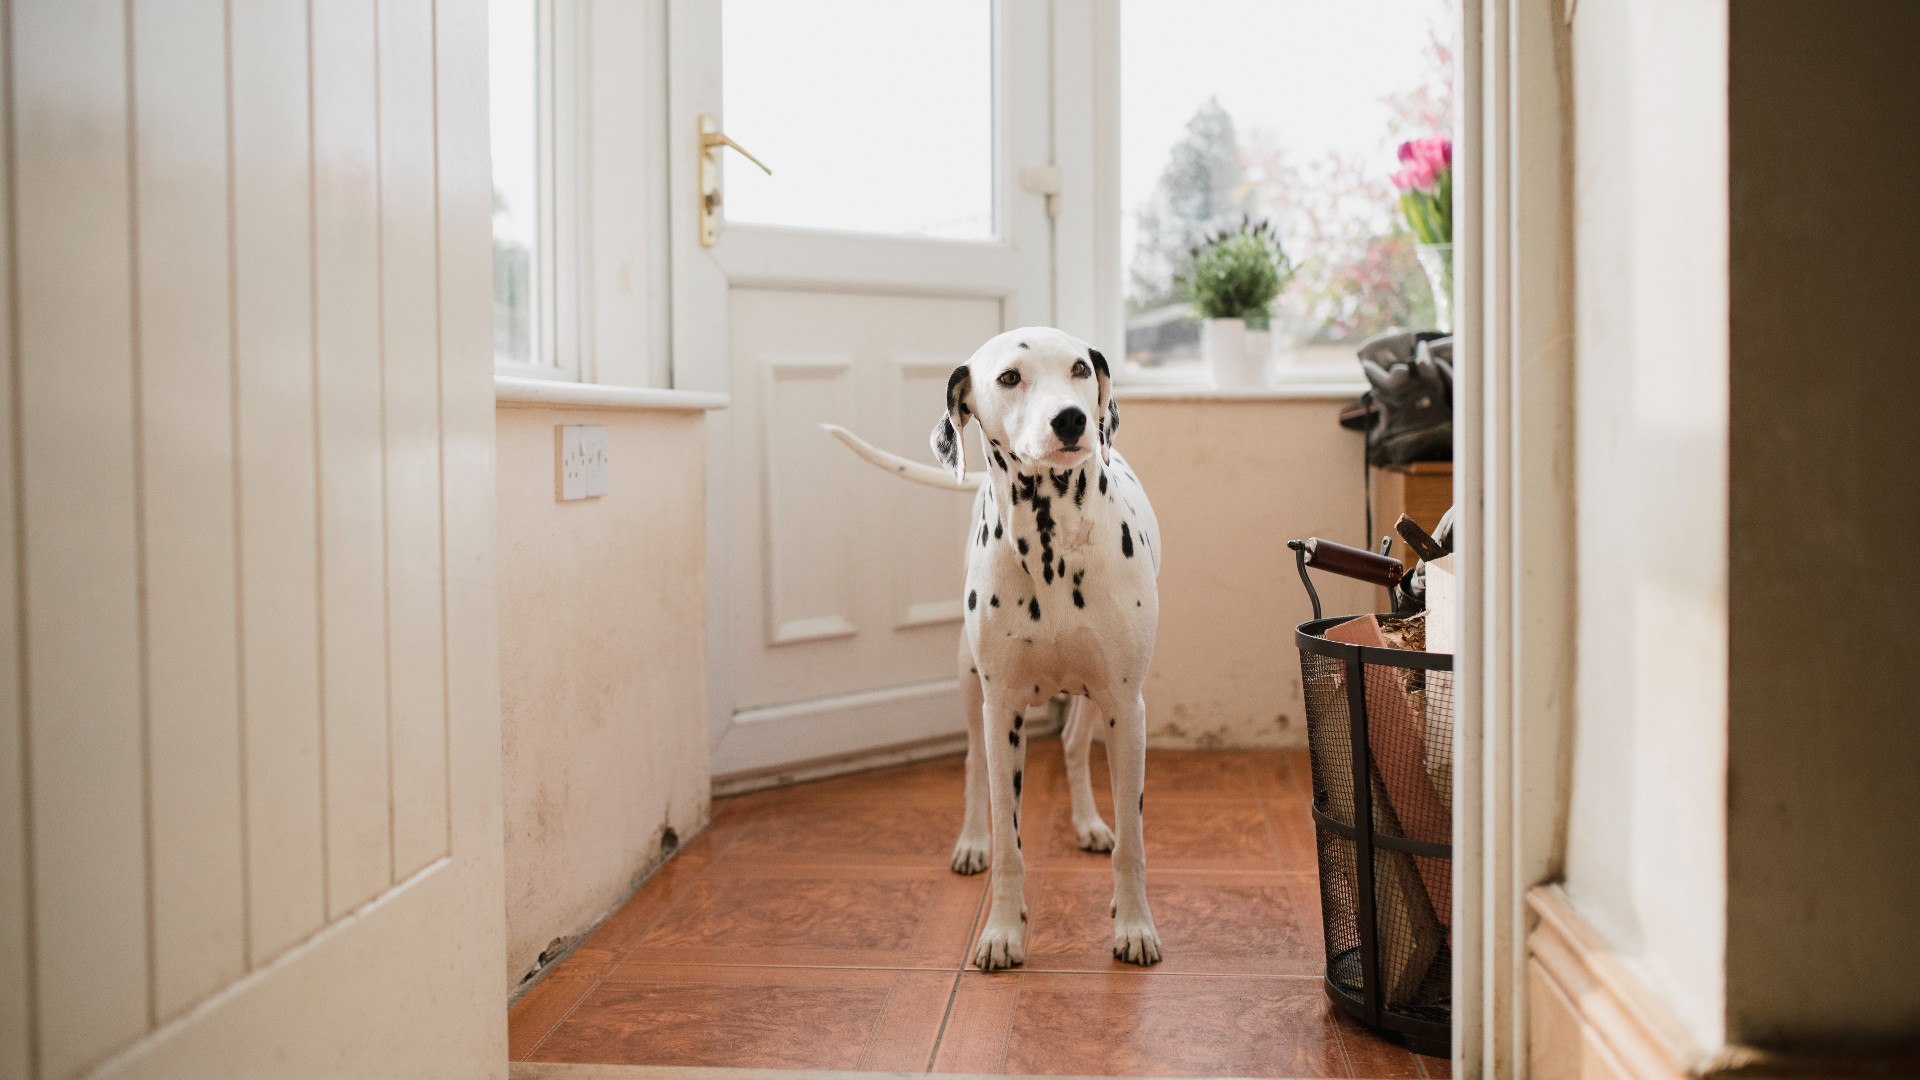 Trainer stresses teaching your dog this doorway rule is vital to avoid harm, and it's not what you'd think